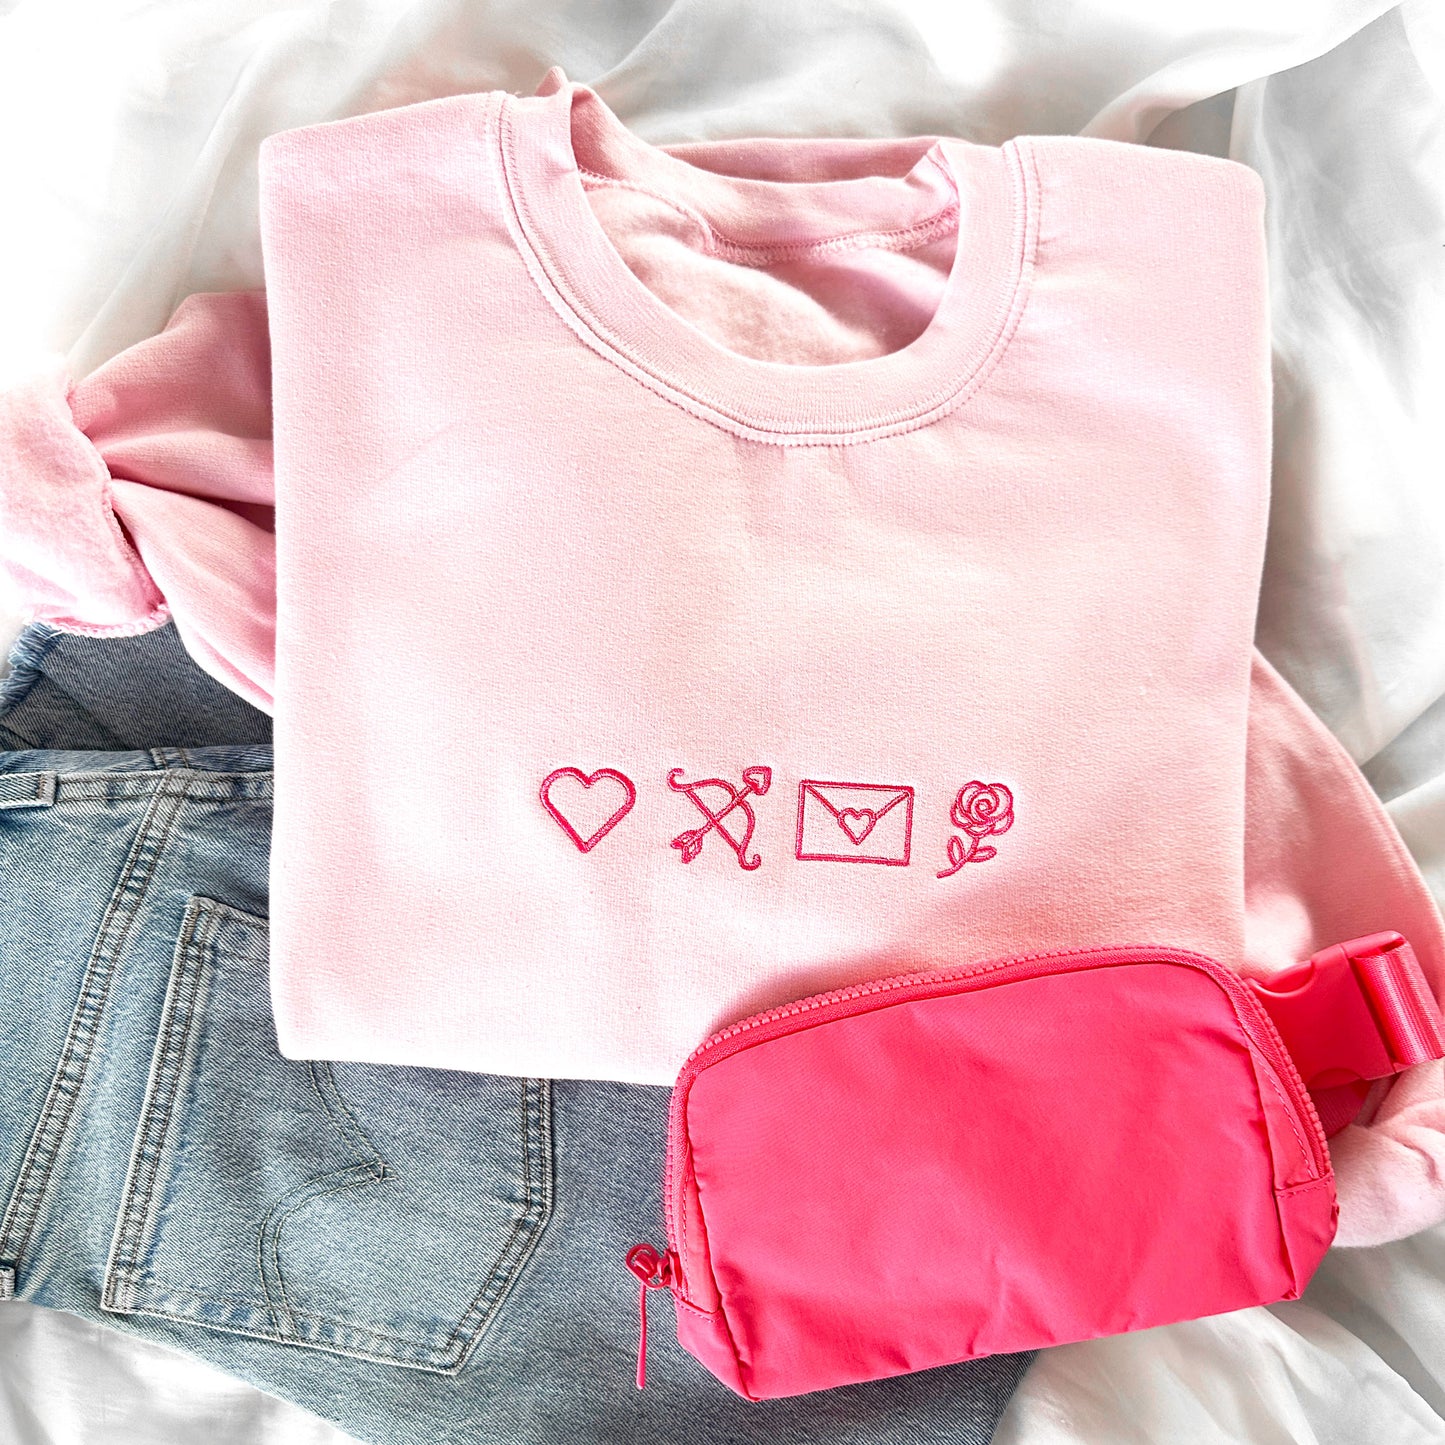 Styled flat lay of a light pink crewneck sweatshirt, jeans, and a pink fanny pack. on the center chest of the crewneck is 4 valentines icons embroidered in pink thread